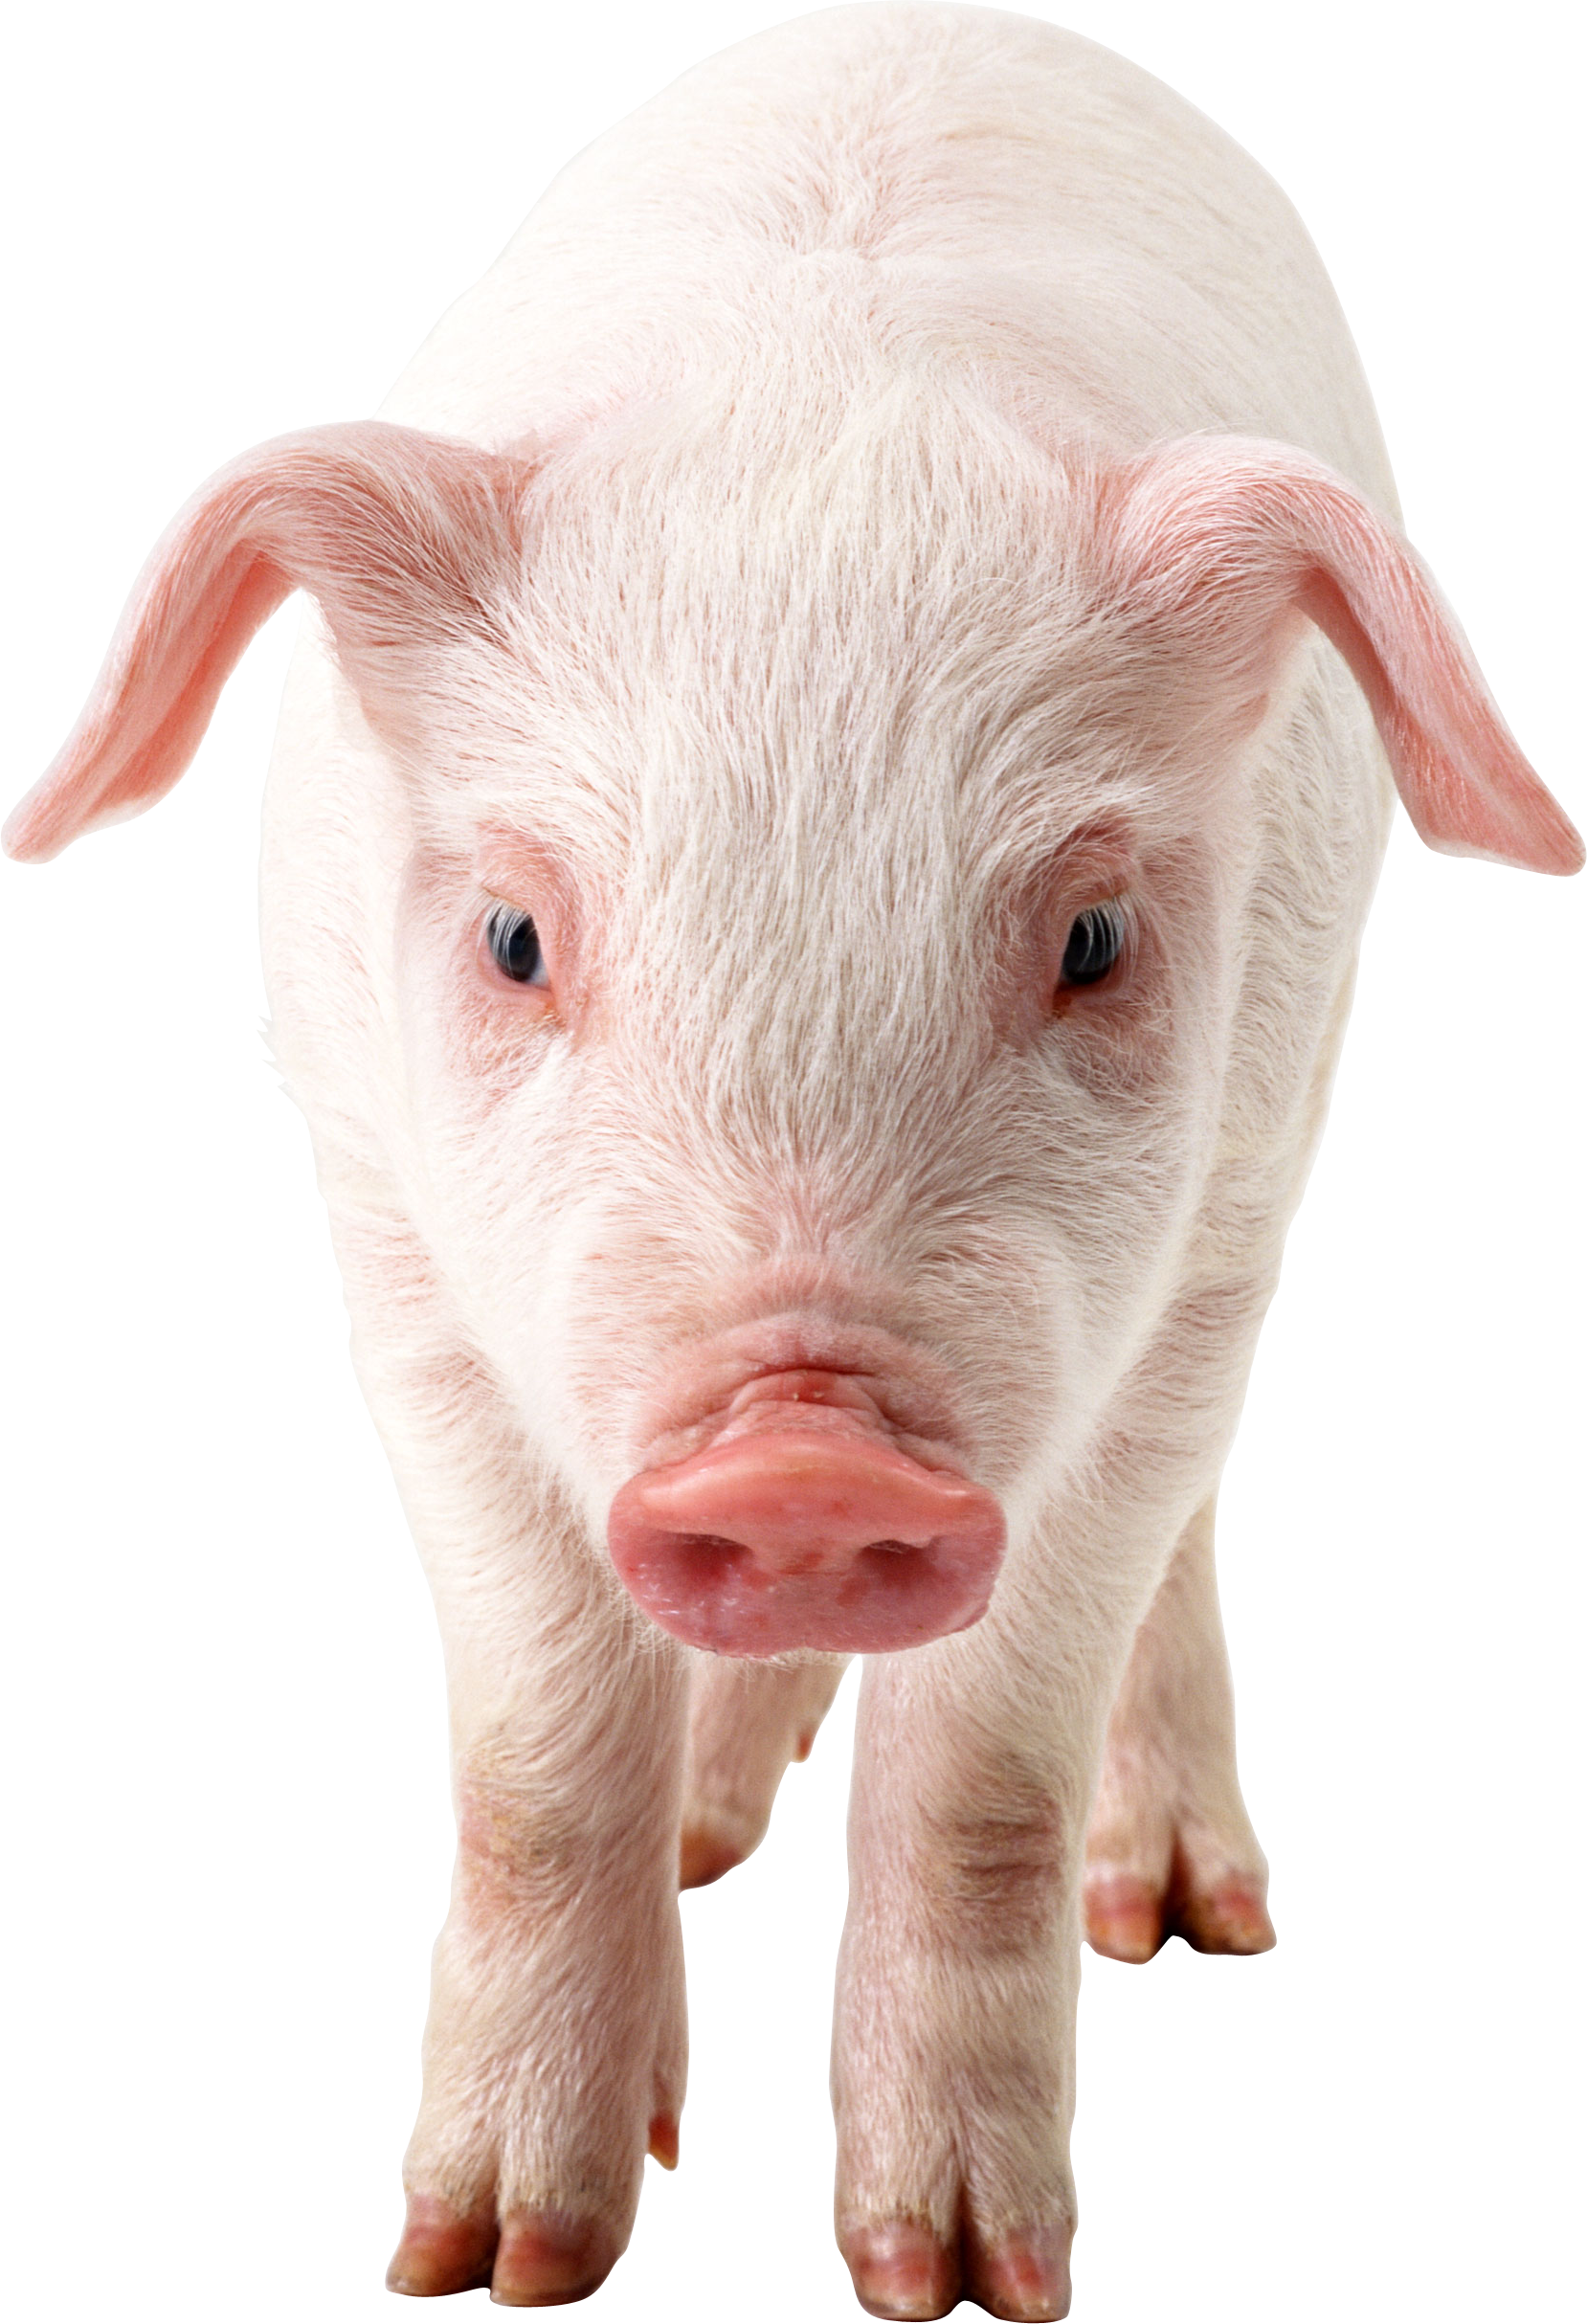 Pig PNG images, free picture download pigs.